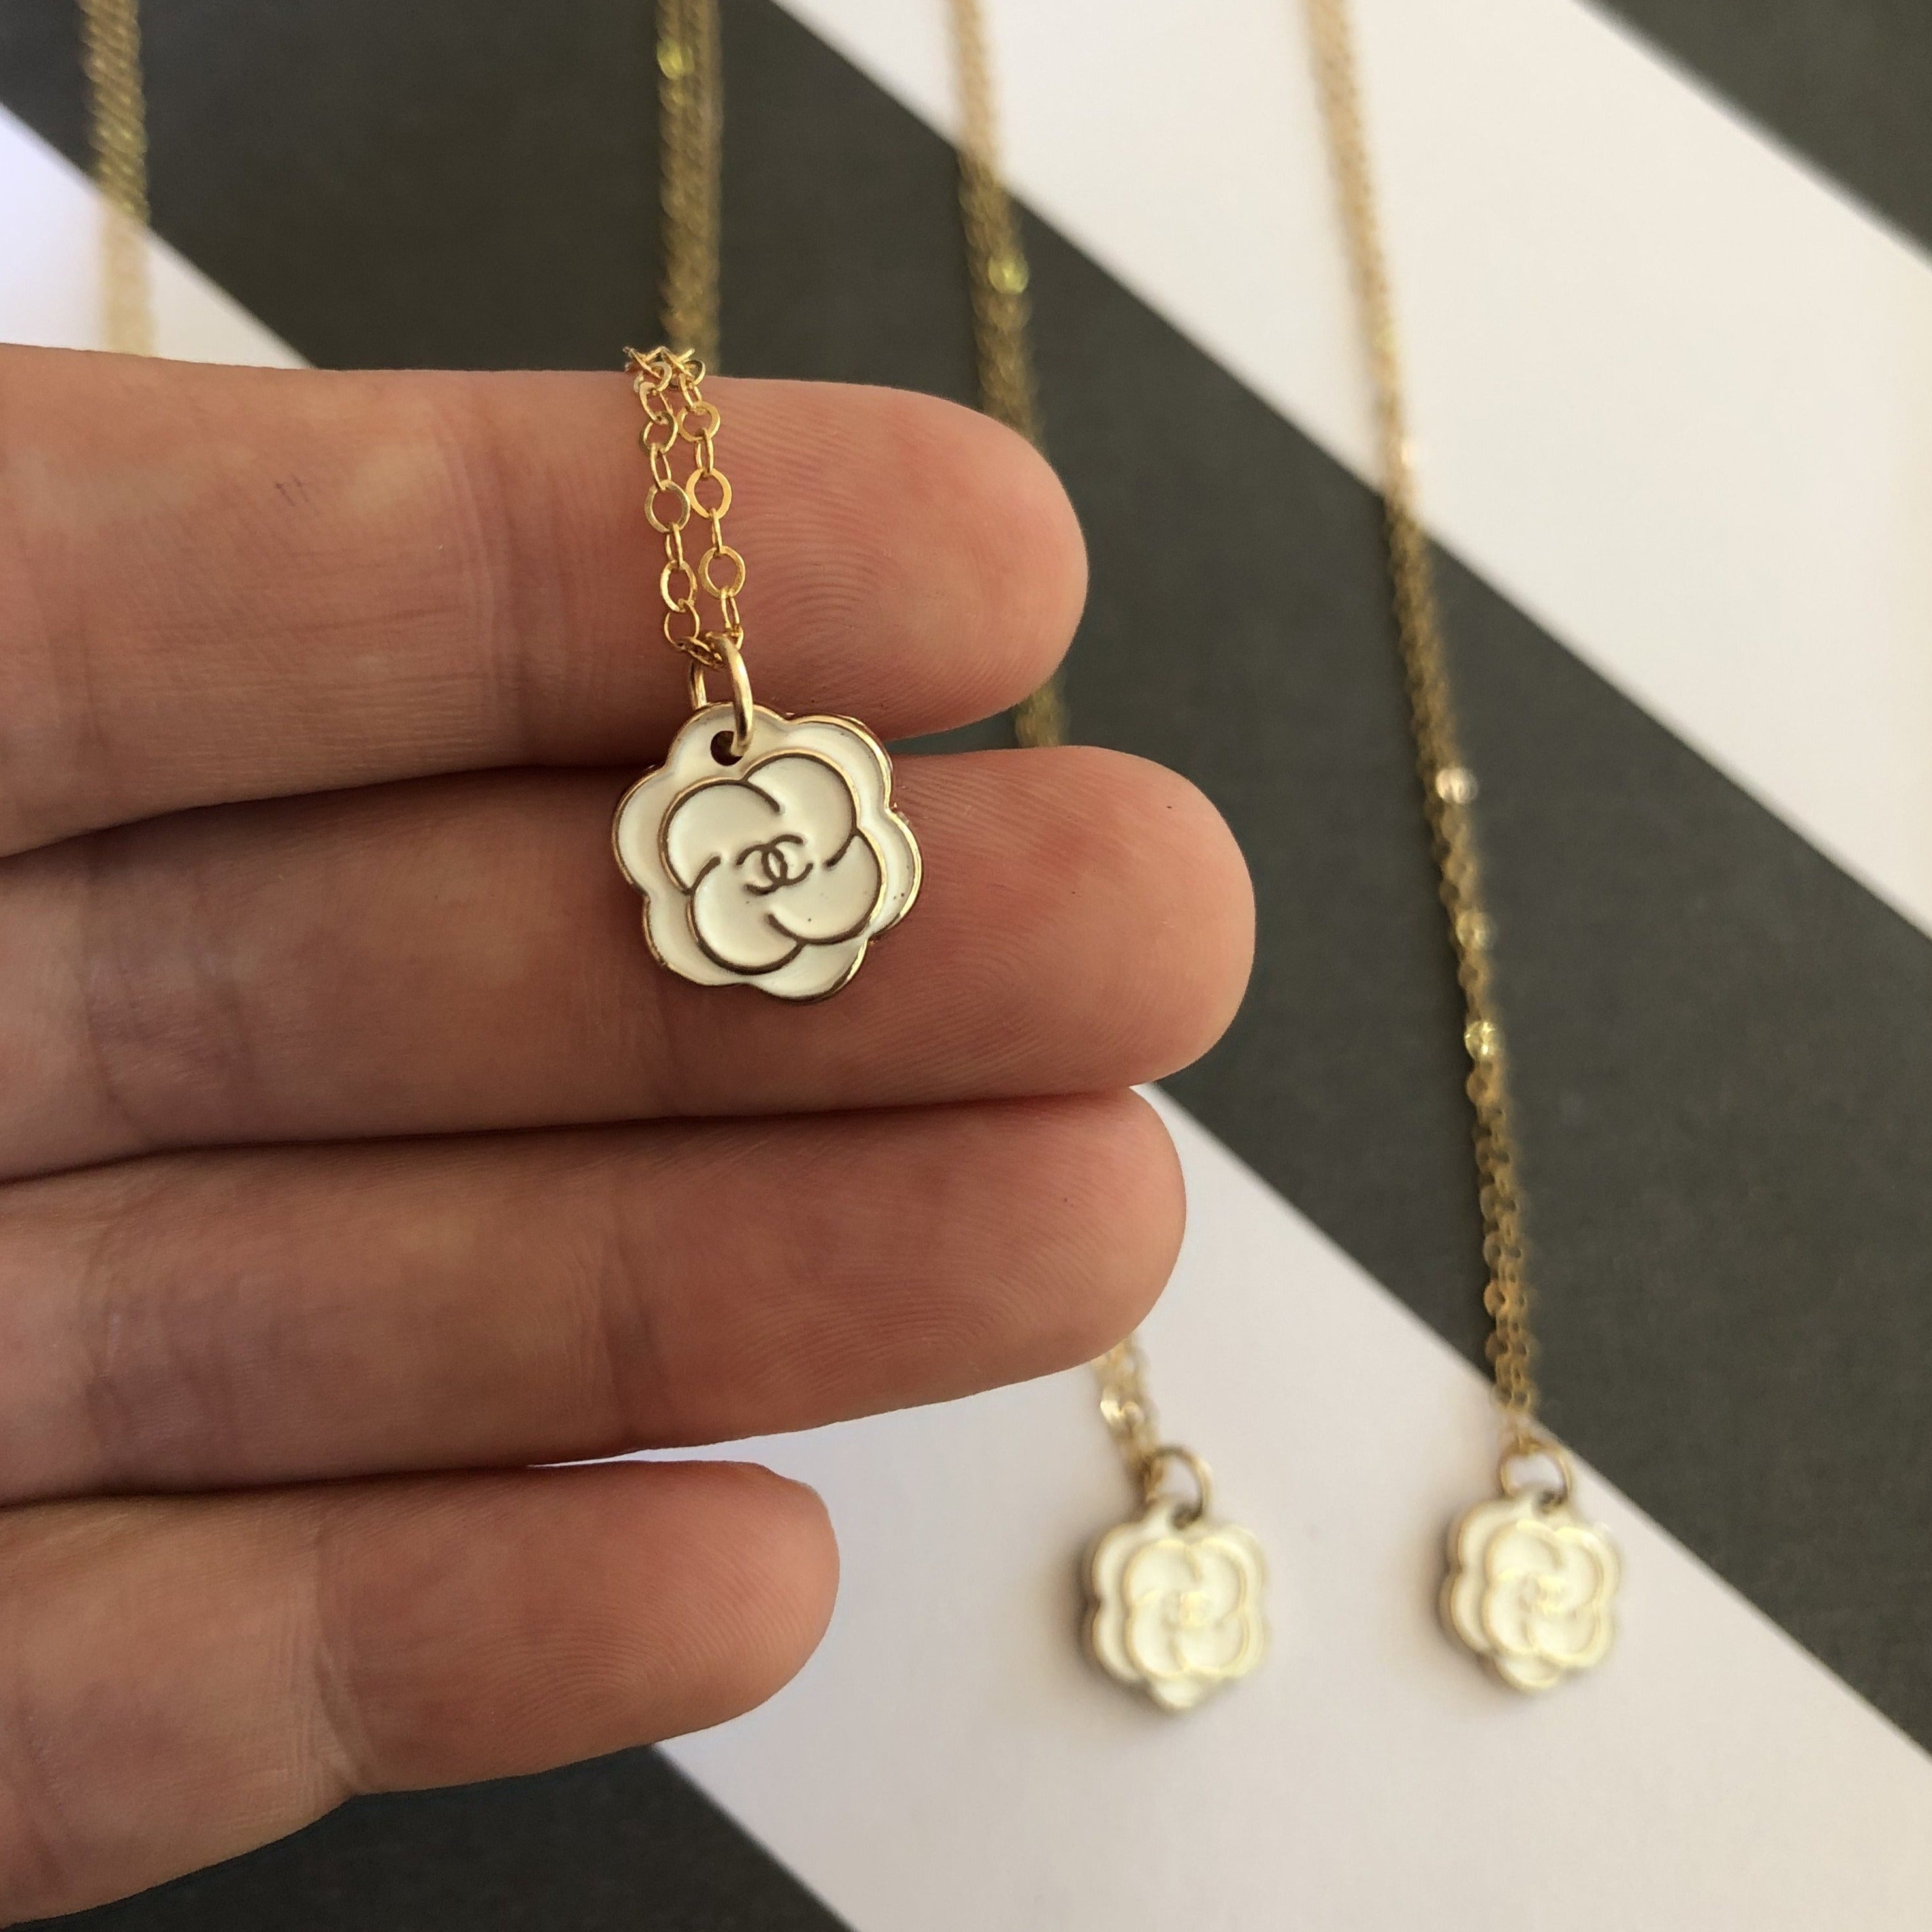 Small Gold and white Chanel Flower Necklace